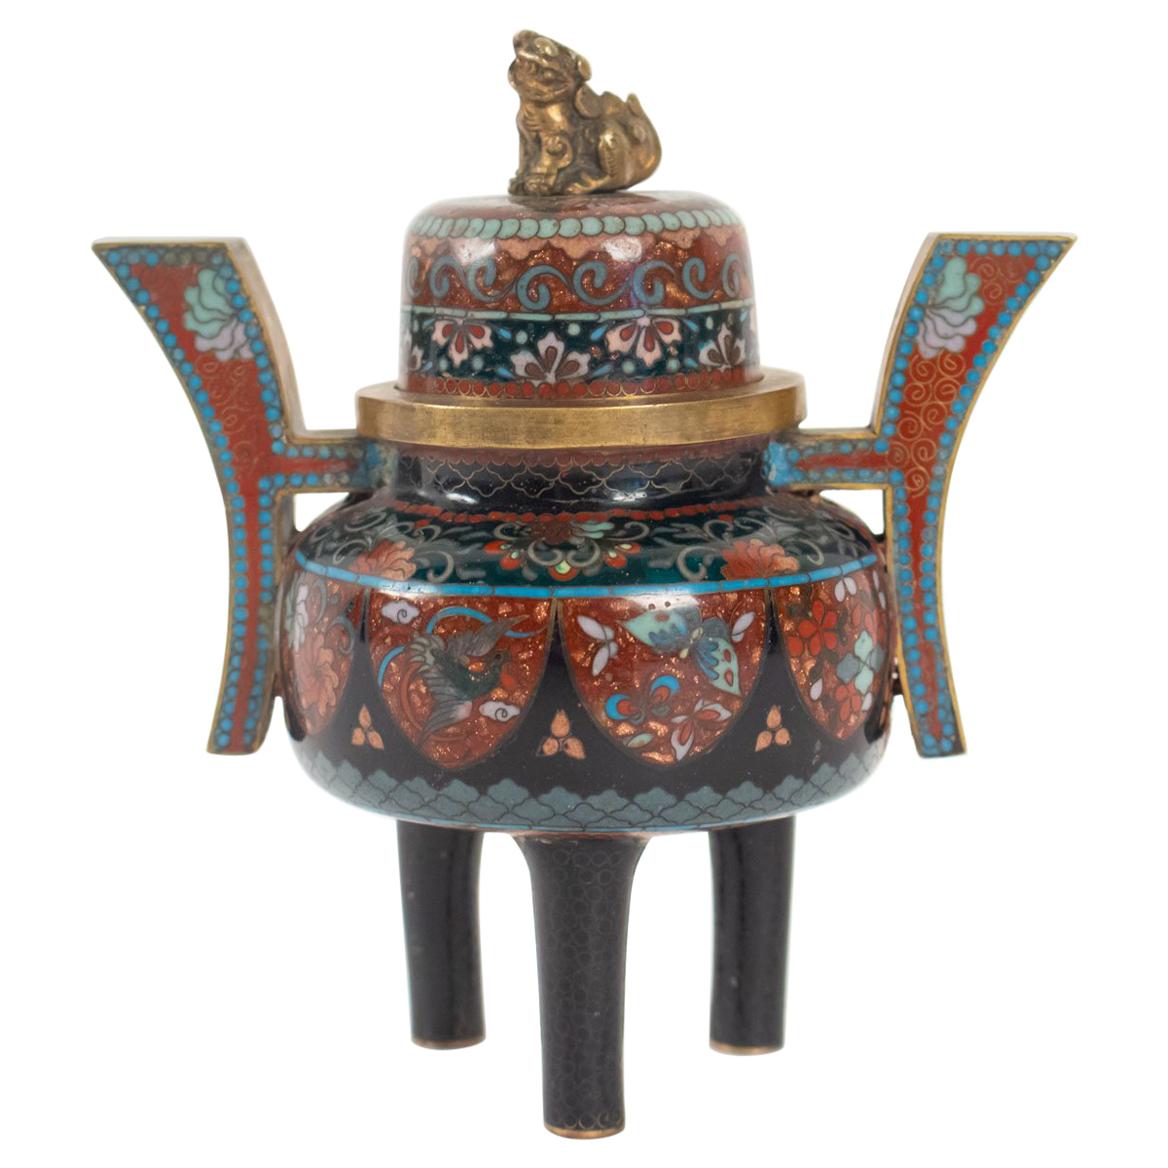 Perfume Burner in Copper Decor Cloisonné Enamels, Topped of a Fo Dog, Japan